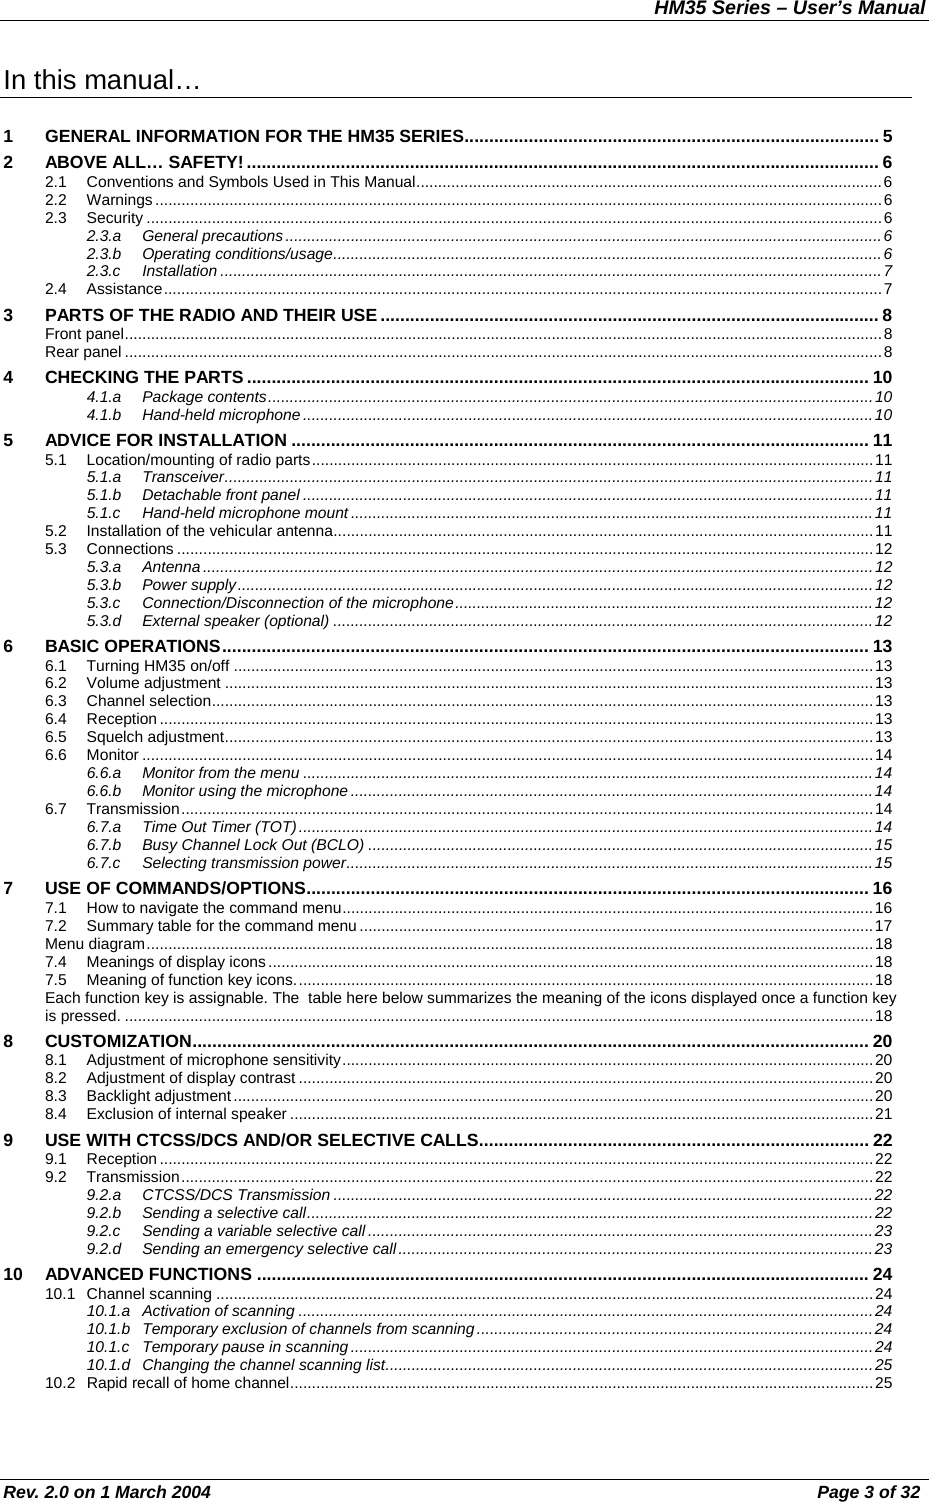 HM35 Series – User’s Manual Rev. 2.0 on 1 March 2004  Page 3 of 32 In this manual…  1  GENERAL INFORMATION FOR THE HM35 SERIES.................................................................................... 5 2 ABOVE ALL… SAFETY! ................................................................................................................................ 6 2.1  Conventions and Symbols Used in This Manual...........................................................................................................6 2.2 Warnings.......................................................................................................................................................................6 2.3 Security .........................................................................................................................................................................6 2.3.a General precautions.........................................................................................................................................6 2.3.b Operating conditions/usage..............................................................................................................................6 2.3.c Installation ........................................................................................................................................................7 2.4 Assistance.....................................................................................................................................................................7 3  PARTS OF THE RADIO AND THEIR USE..................................................................................................... 8 Front panel..............................................................................................................................................................................8 Rear panel ..............................................................................................................................................................................8 4  CHECKING THE PARTS.............................................................................................................................. 10 4.1.a Package contents...........................................................................................................................................10 4.1.b Hand-held microphone...................................................................................................................................10 5  ADVICE FOR INSTALLATION ..................................................................................................................... 11 5.1  Location/mounting of radio parts.................................................................................................................................11 5.1.a Transceiver.....................................................................................................................................................11 5.1.b  Detachable front panel ...................................................................................................................................11 5.1.c  Hand-held microphone mount ........................................................................................................................11 5.2  Installation of the vehicular antenna............................................................................................................................11 5.3 Connections ................................................................................................................................................................12 5.3.a Antenna..........................................................................................................................................................12 5.3.b Power supply..................................................................................................................................................12 5.3.c  Connection/Disconnection of the microphone................................................................................................12 5.3.d External speaker (optional) ............................................................................................................................12 6 BASIC OPERATIONS................................................................................................................................... 13 6.1  Turning HM35 on/off ...................................................................................................................................................13 6.2 Volume adjustment .....................................................................................................................................................13 6.3 Channel selection........................................................................................................................................................13 6.4 Reception....................................................................................................................................................................13 6.5 Squelch adjustment.....................................................................................................................................................13 6.6 Monitor ........................................................................................................................................................................14 6.6.a  Monitor from the menu ...................................................................................................................................14 6.6.b  Monitor using the microphone ........................................................................................................................14 6.7 Transmission...............................................................................................................................................................14 6.7.a  Time Out Timer (TOT)....................................................................................................................................14 6.7.b  Busy Channel Lock Out (BCLO) ....................................................................................................................15 6.7.c Selecting transmission power.........................................................................................................................15 7  USE OF COMMANDS/OPTIONS.................................................................................................................. 16 7.1  How to navigate the command menu..........................................................................................................................16 7.2  Summary table for the command menu......................................................................................................................17 Menu diagram.......................................................................................................................................................................18 7.4  Meanings of display icons ...........................................................................................................................................18 7.5  Meaning of function key icons.....................................................................................................................................18 Each function key is assignable. The  table here below summarizes the meaning of the icons displayed once a function key is pressed. ............................................................................................................................................................................18 8 CUSTOMIZATION......................................................................................................................................... 20 8.1  Adjustment of microphone sensitivity..........................................................................................................................20 8.2  Adjustment of display contrast ....................................................................................................................................20 8.3 Backlight adjustment ...................................................................................................................................................20 8.4  Exclusion of internal speaker ......................................................................................................................................21 9  USE WITH CTCSS/DCS AND/OR SELECTIVE CALLS............................................................................... 22 9.1 Reception....................................................................................................................................................................22 9.2 Transmission...............................................................................................................................................................22 9.2.a CTCSS/DCS Transmission ............................................................................................................................22 9.2.b  Sending a selective call..................................................................................................................................22 9.2.c  Sending a variable selective call ....................................................................................................................23 9.2.d  Sending an emergency selective call.............................................................................................................23 10 ADVANCED FUNCTIONS ............................................................................................................................ 24 10.1 Channel scanning .......................................................................................................................................................24 10.1.a Activation of scanning ....................................................................................................................................24 10.1.b  Temporary exclusion of channels from scanning...........................................................................................24 10.1.c  Temporary pause in scanning........................................................................................................................24 10.1.d  Changing the channel scanning list................................................................................................................25 10.2  Rapid recall of home channel......................................................................................................................................25 